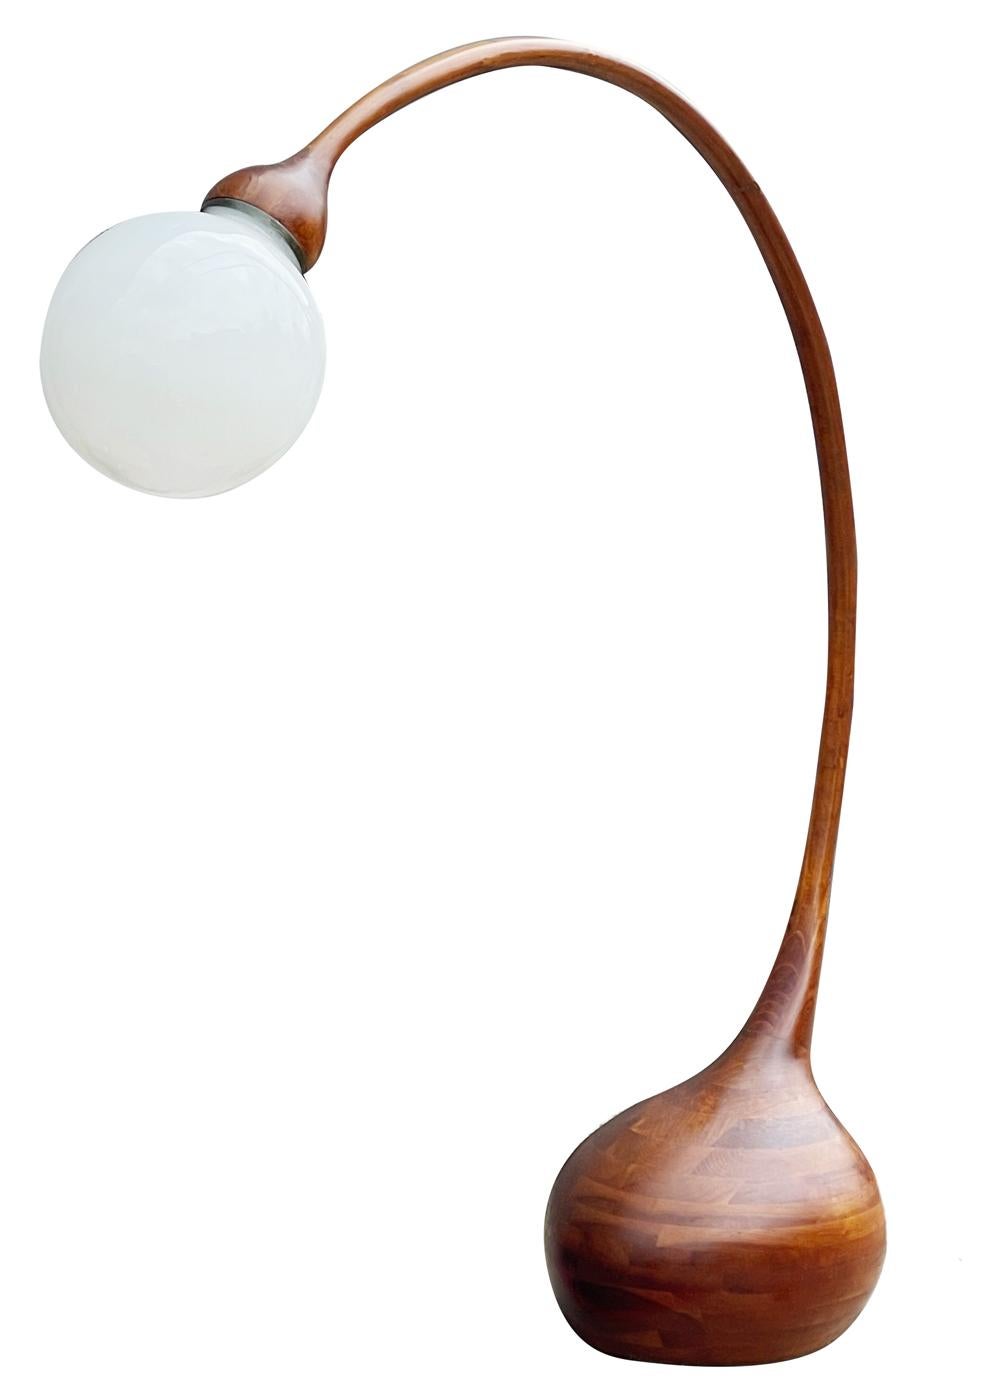 A large, impressive and sculptural floor lamp made by Robert Worth c.1970's West Chester PA. The lamp is entirely constructed of laminated hard woods, with brass lamp fitting and milk glass globe. Branded mark with signature.